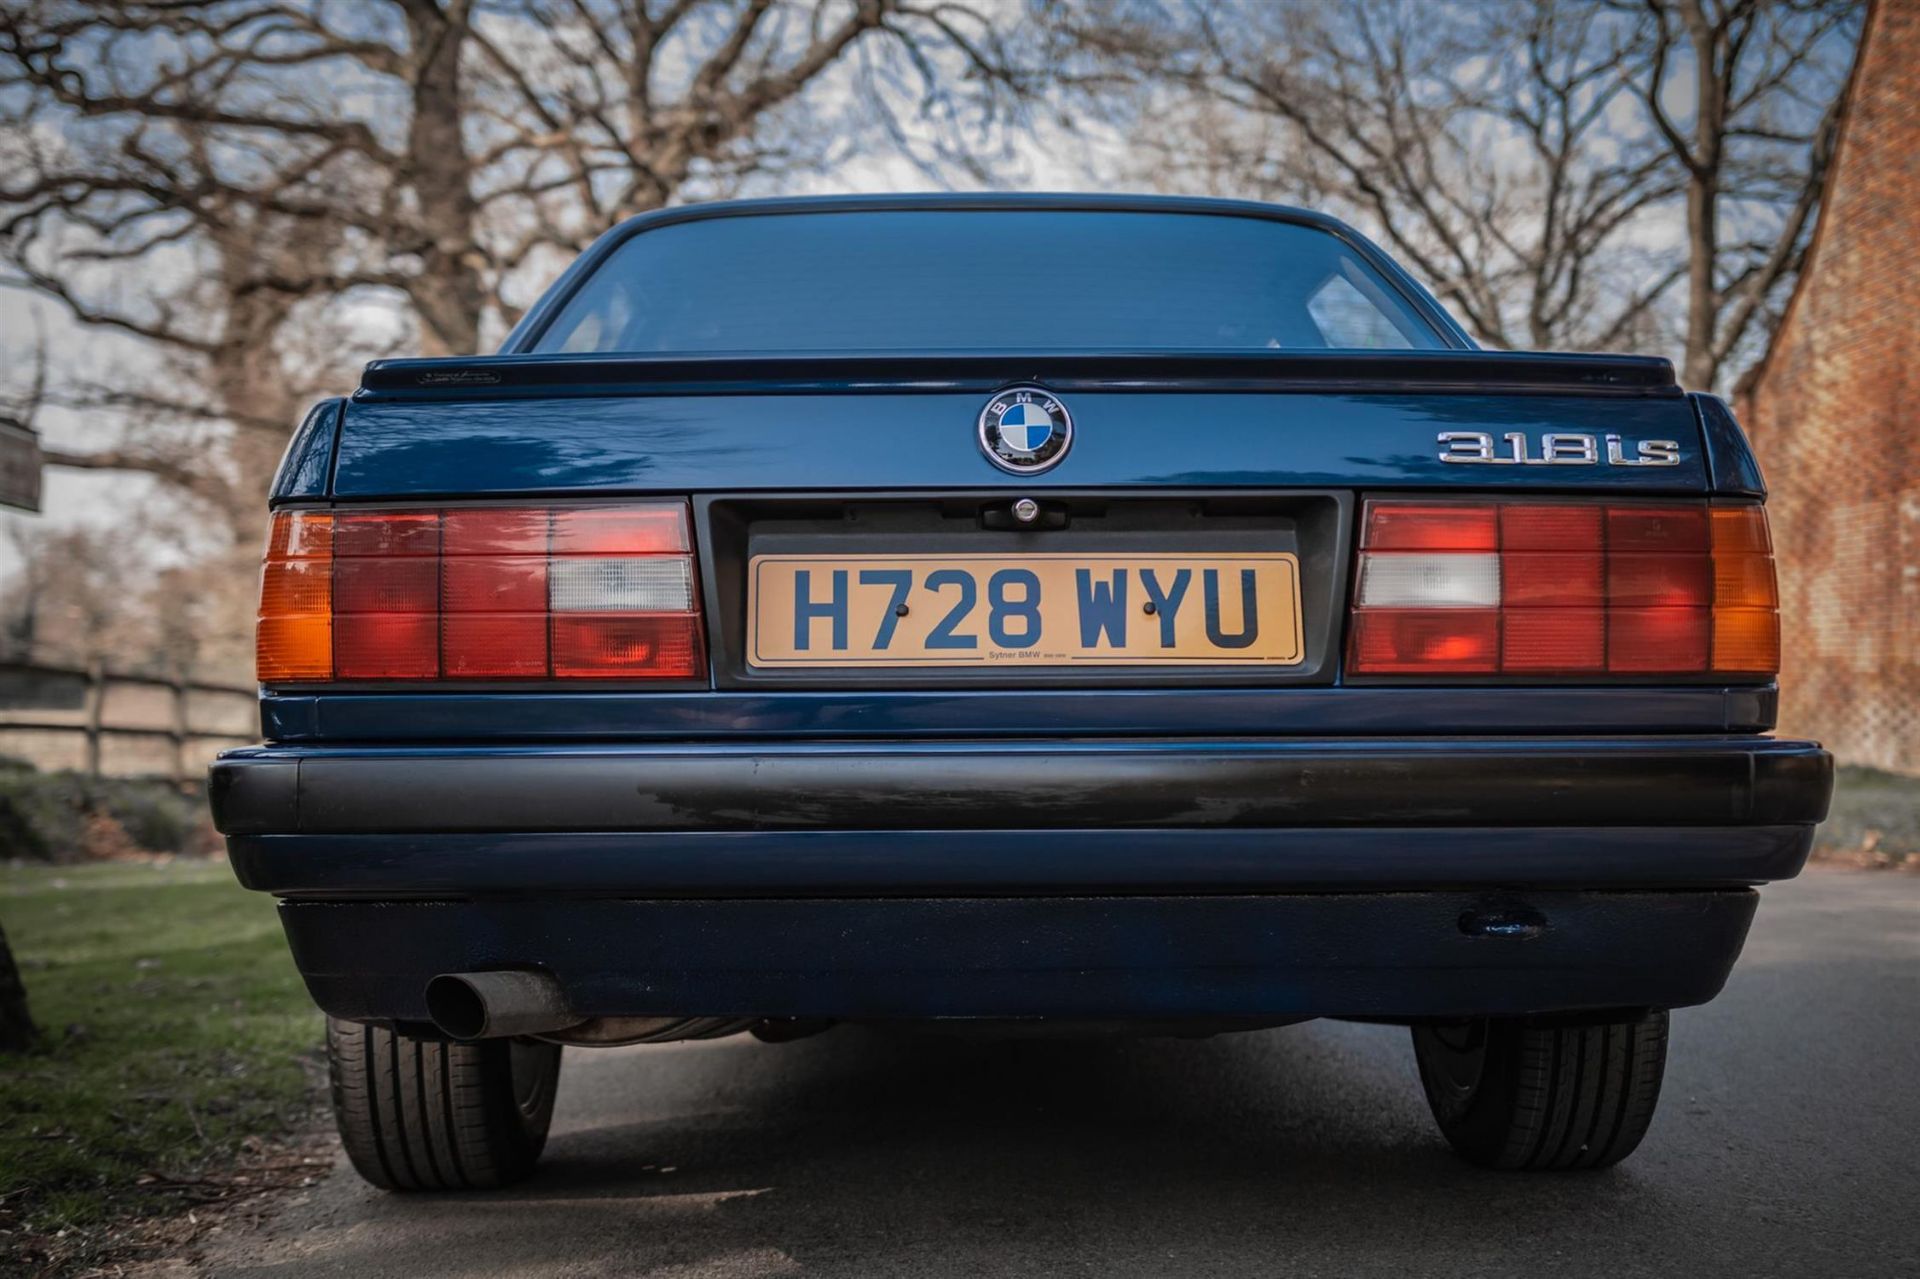 1990 BMW 318is Coupé (E30) - Image 6 of 10